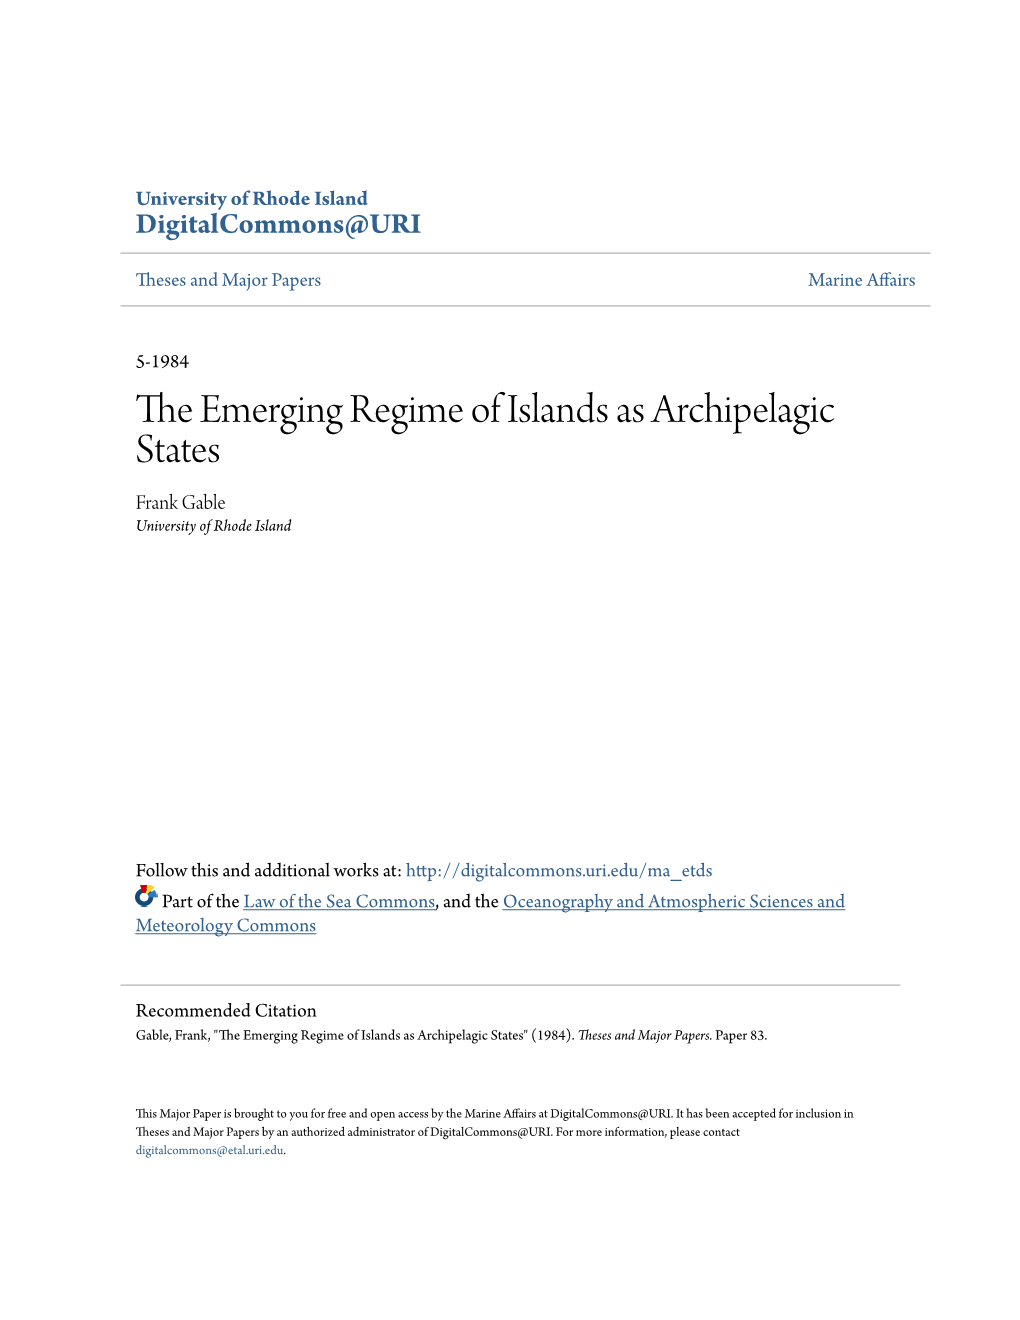 The Emerging Regime of Islands As Archipelagic States